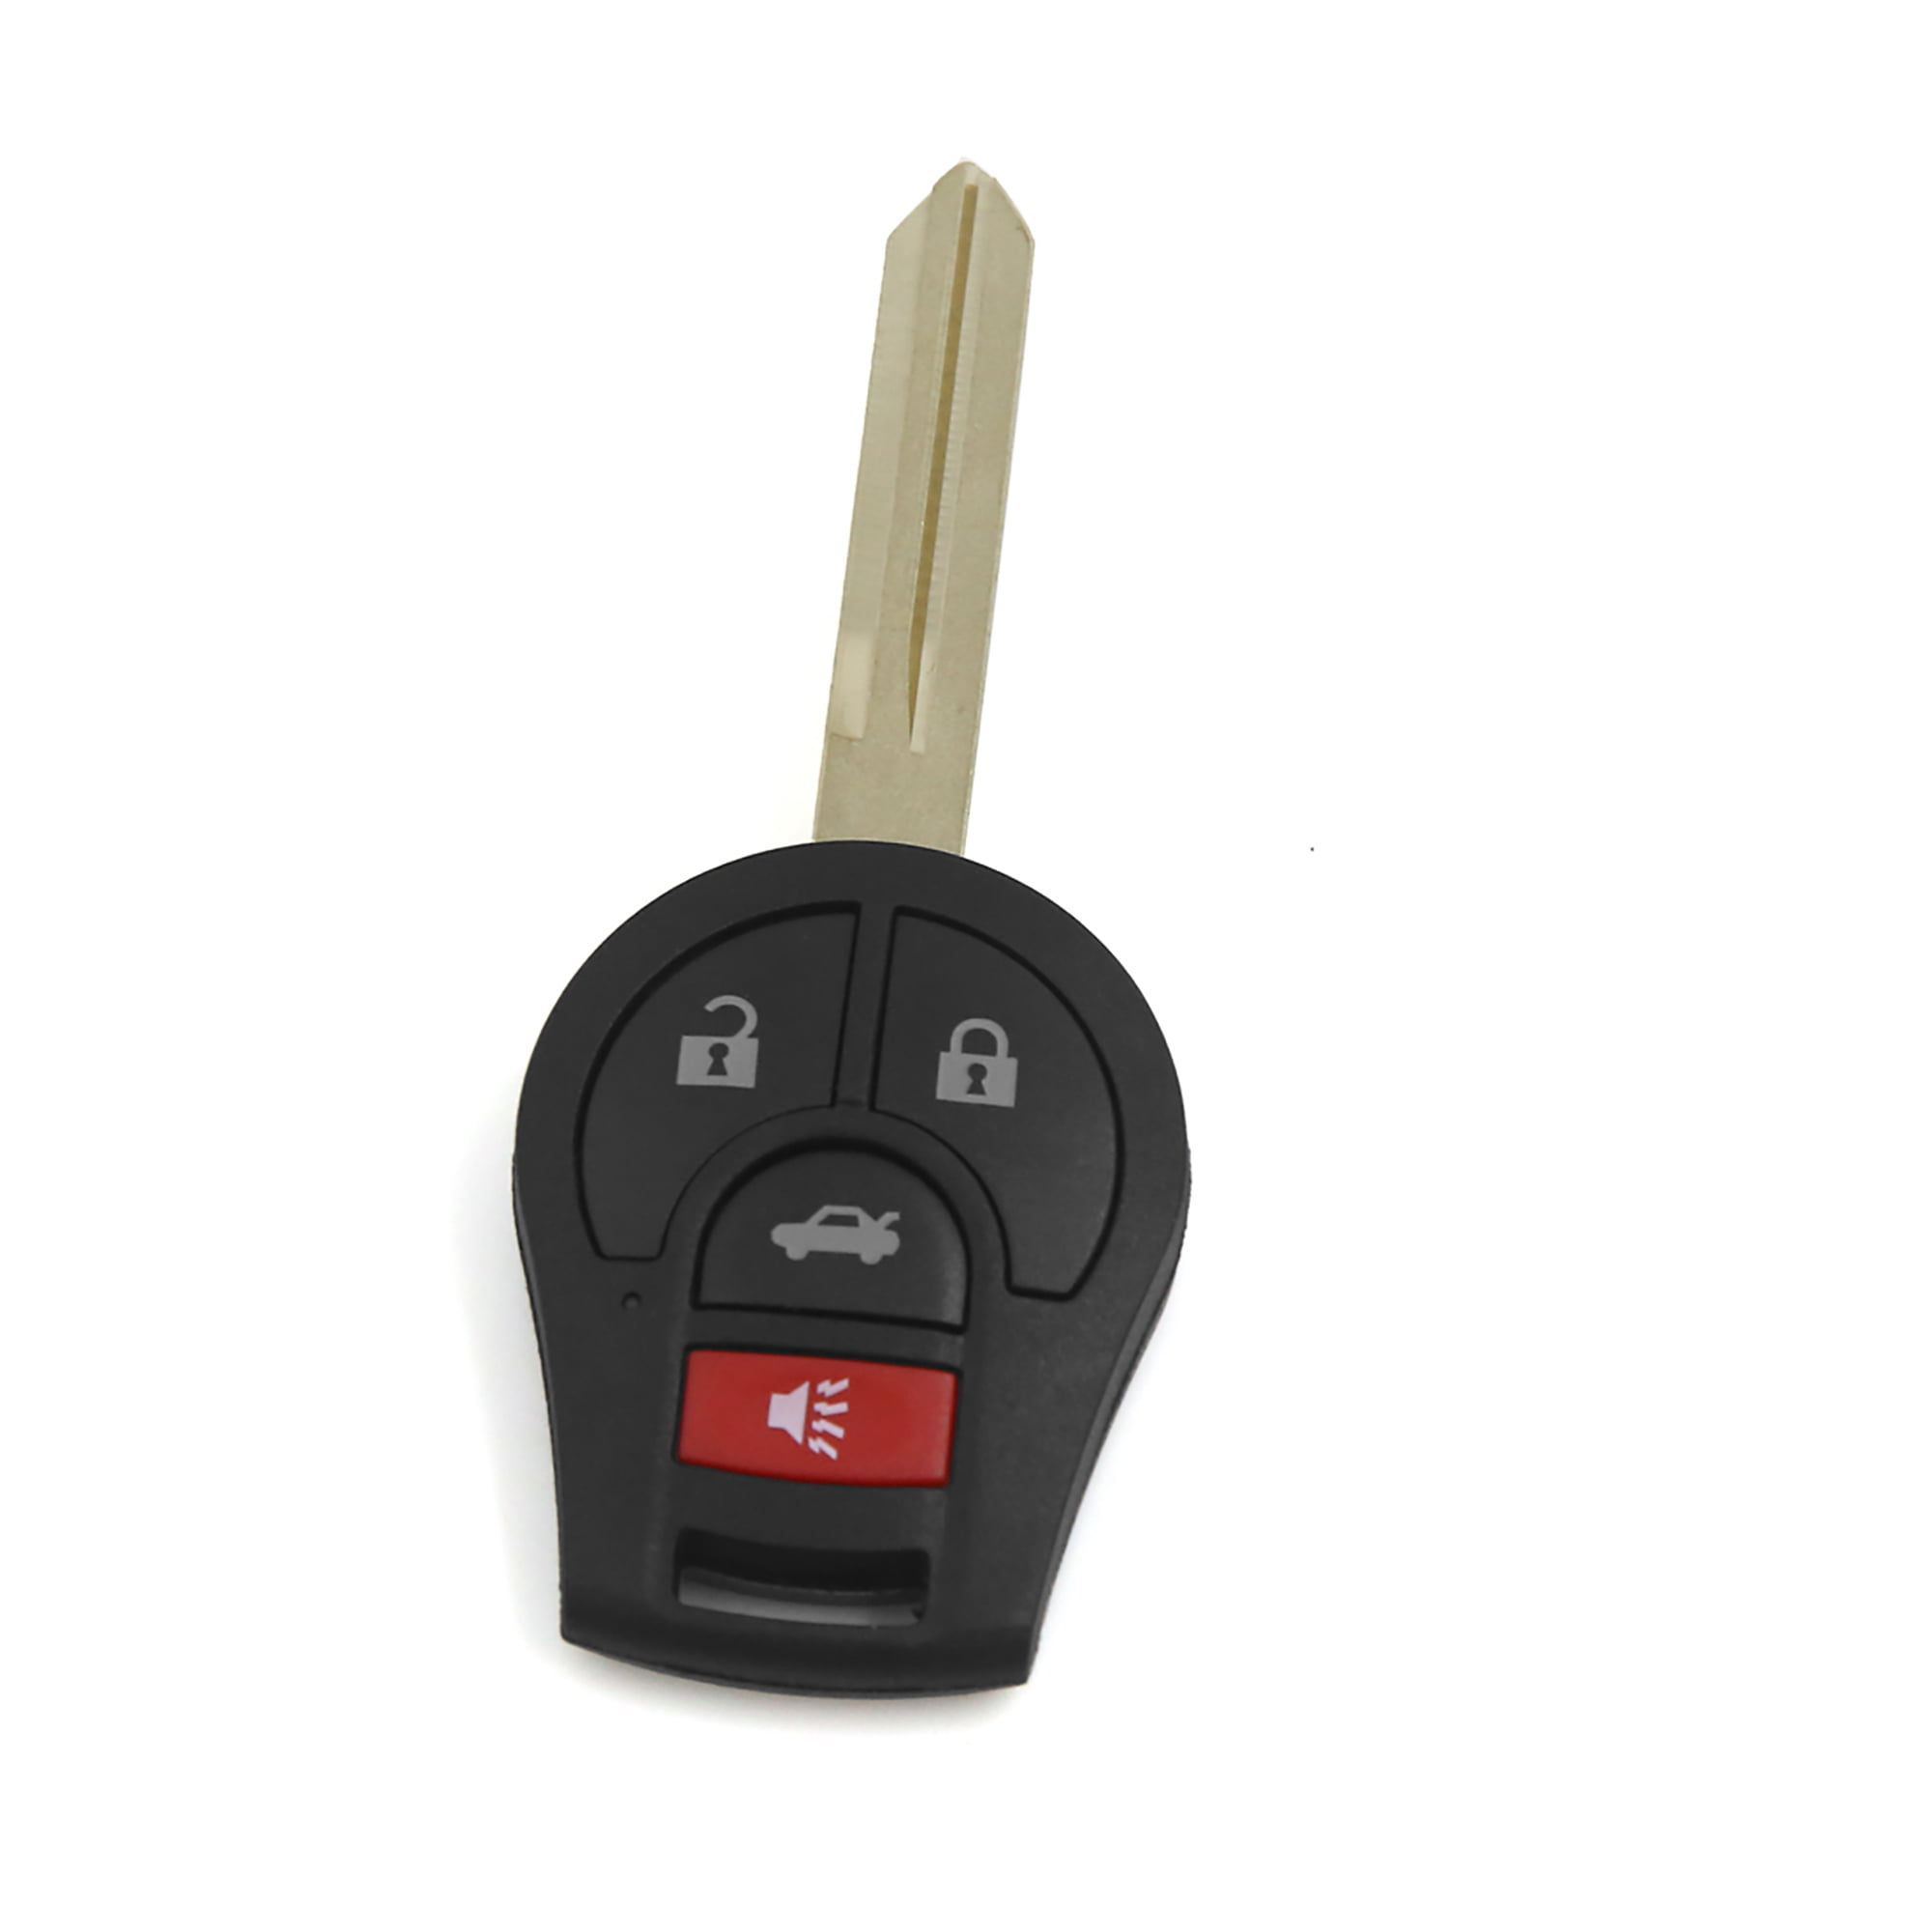 Keyless Entry Remote Key & Uncut Chip Ignition Key For Nissan Maxima Quest Versa